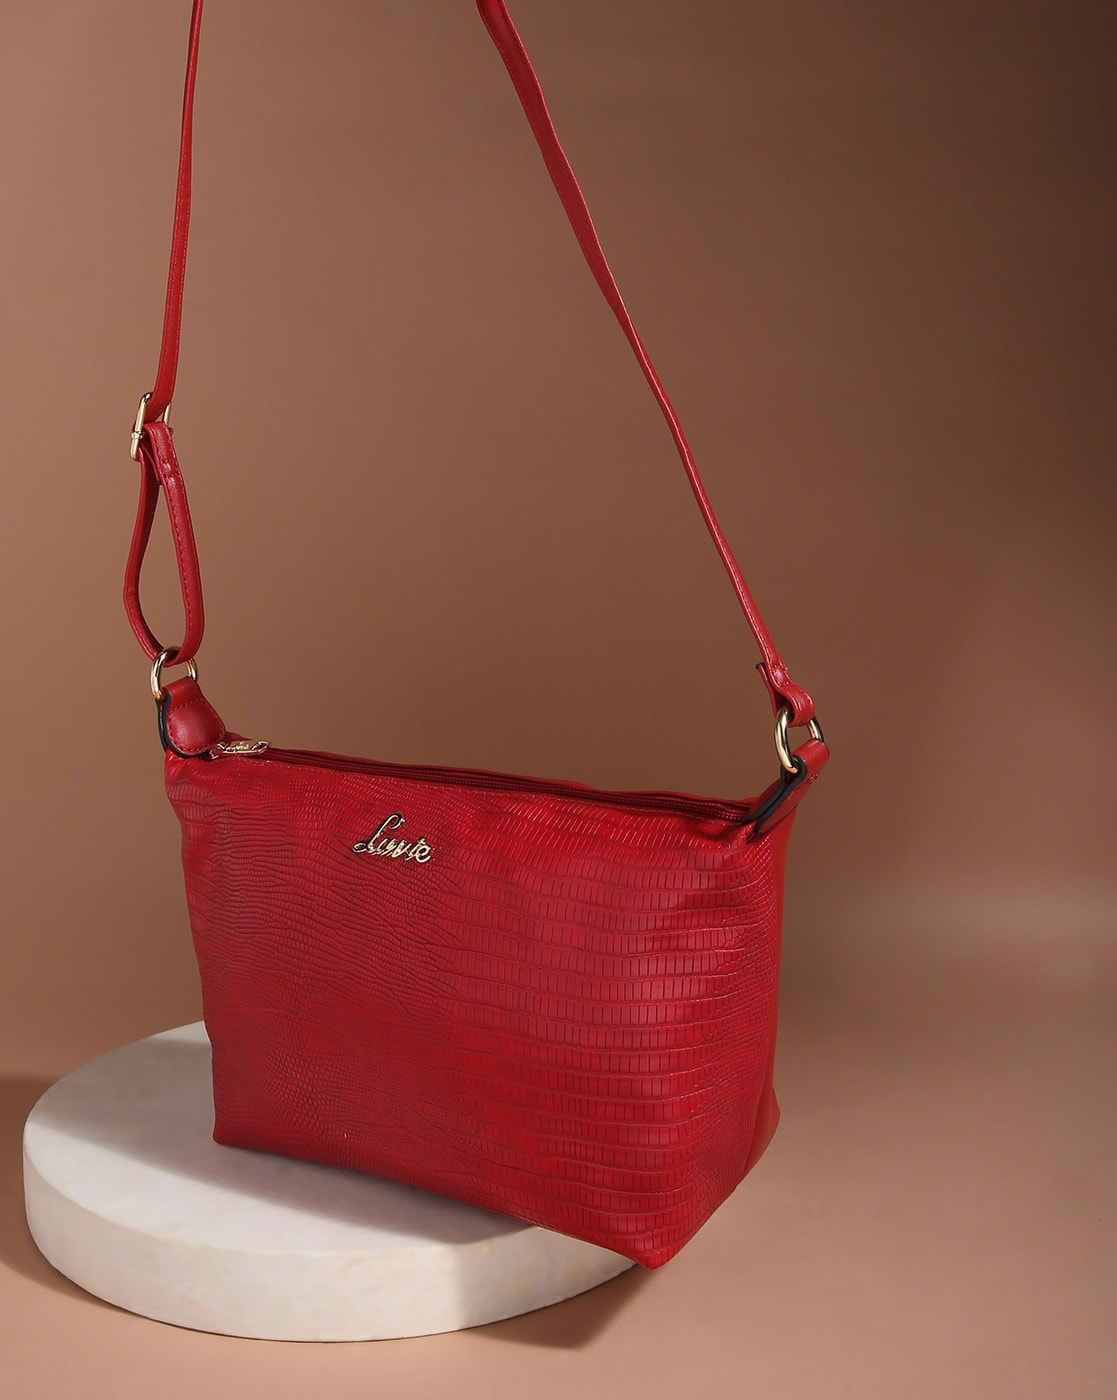 Dear Santa, We Want More Lavie Bags To Sleigh This Christmas! – Lavie World